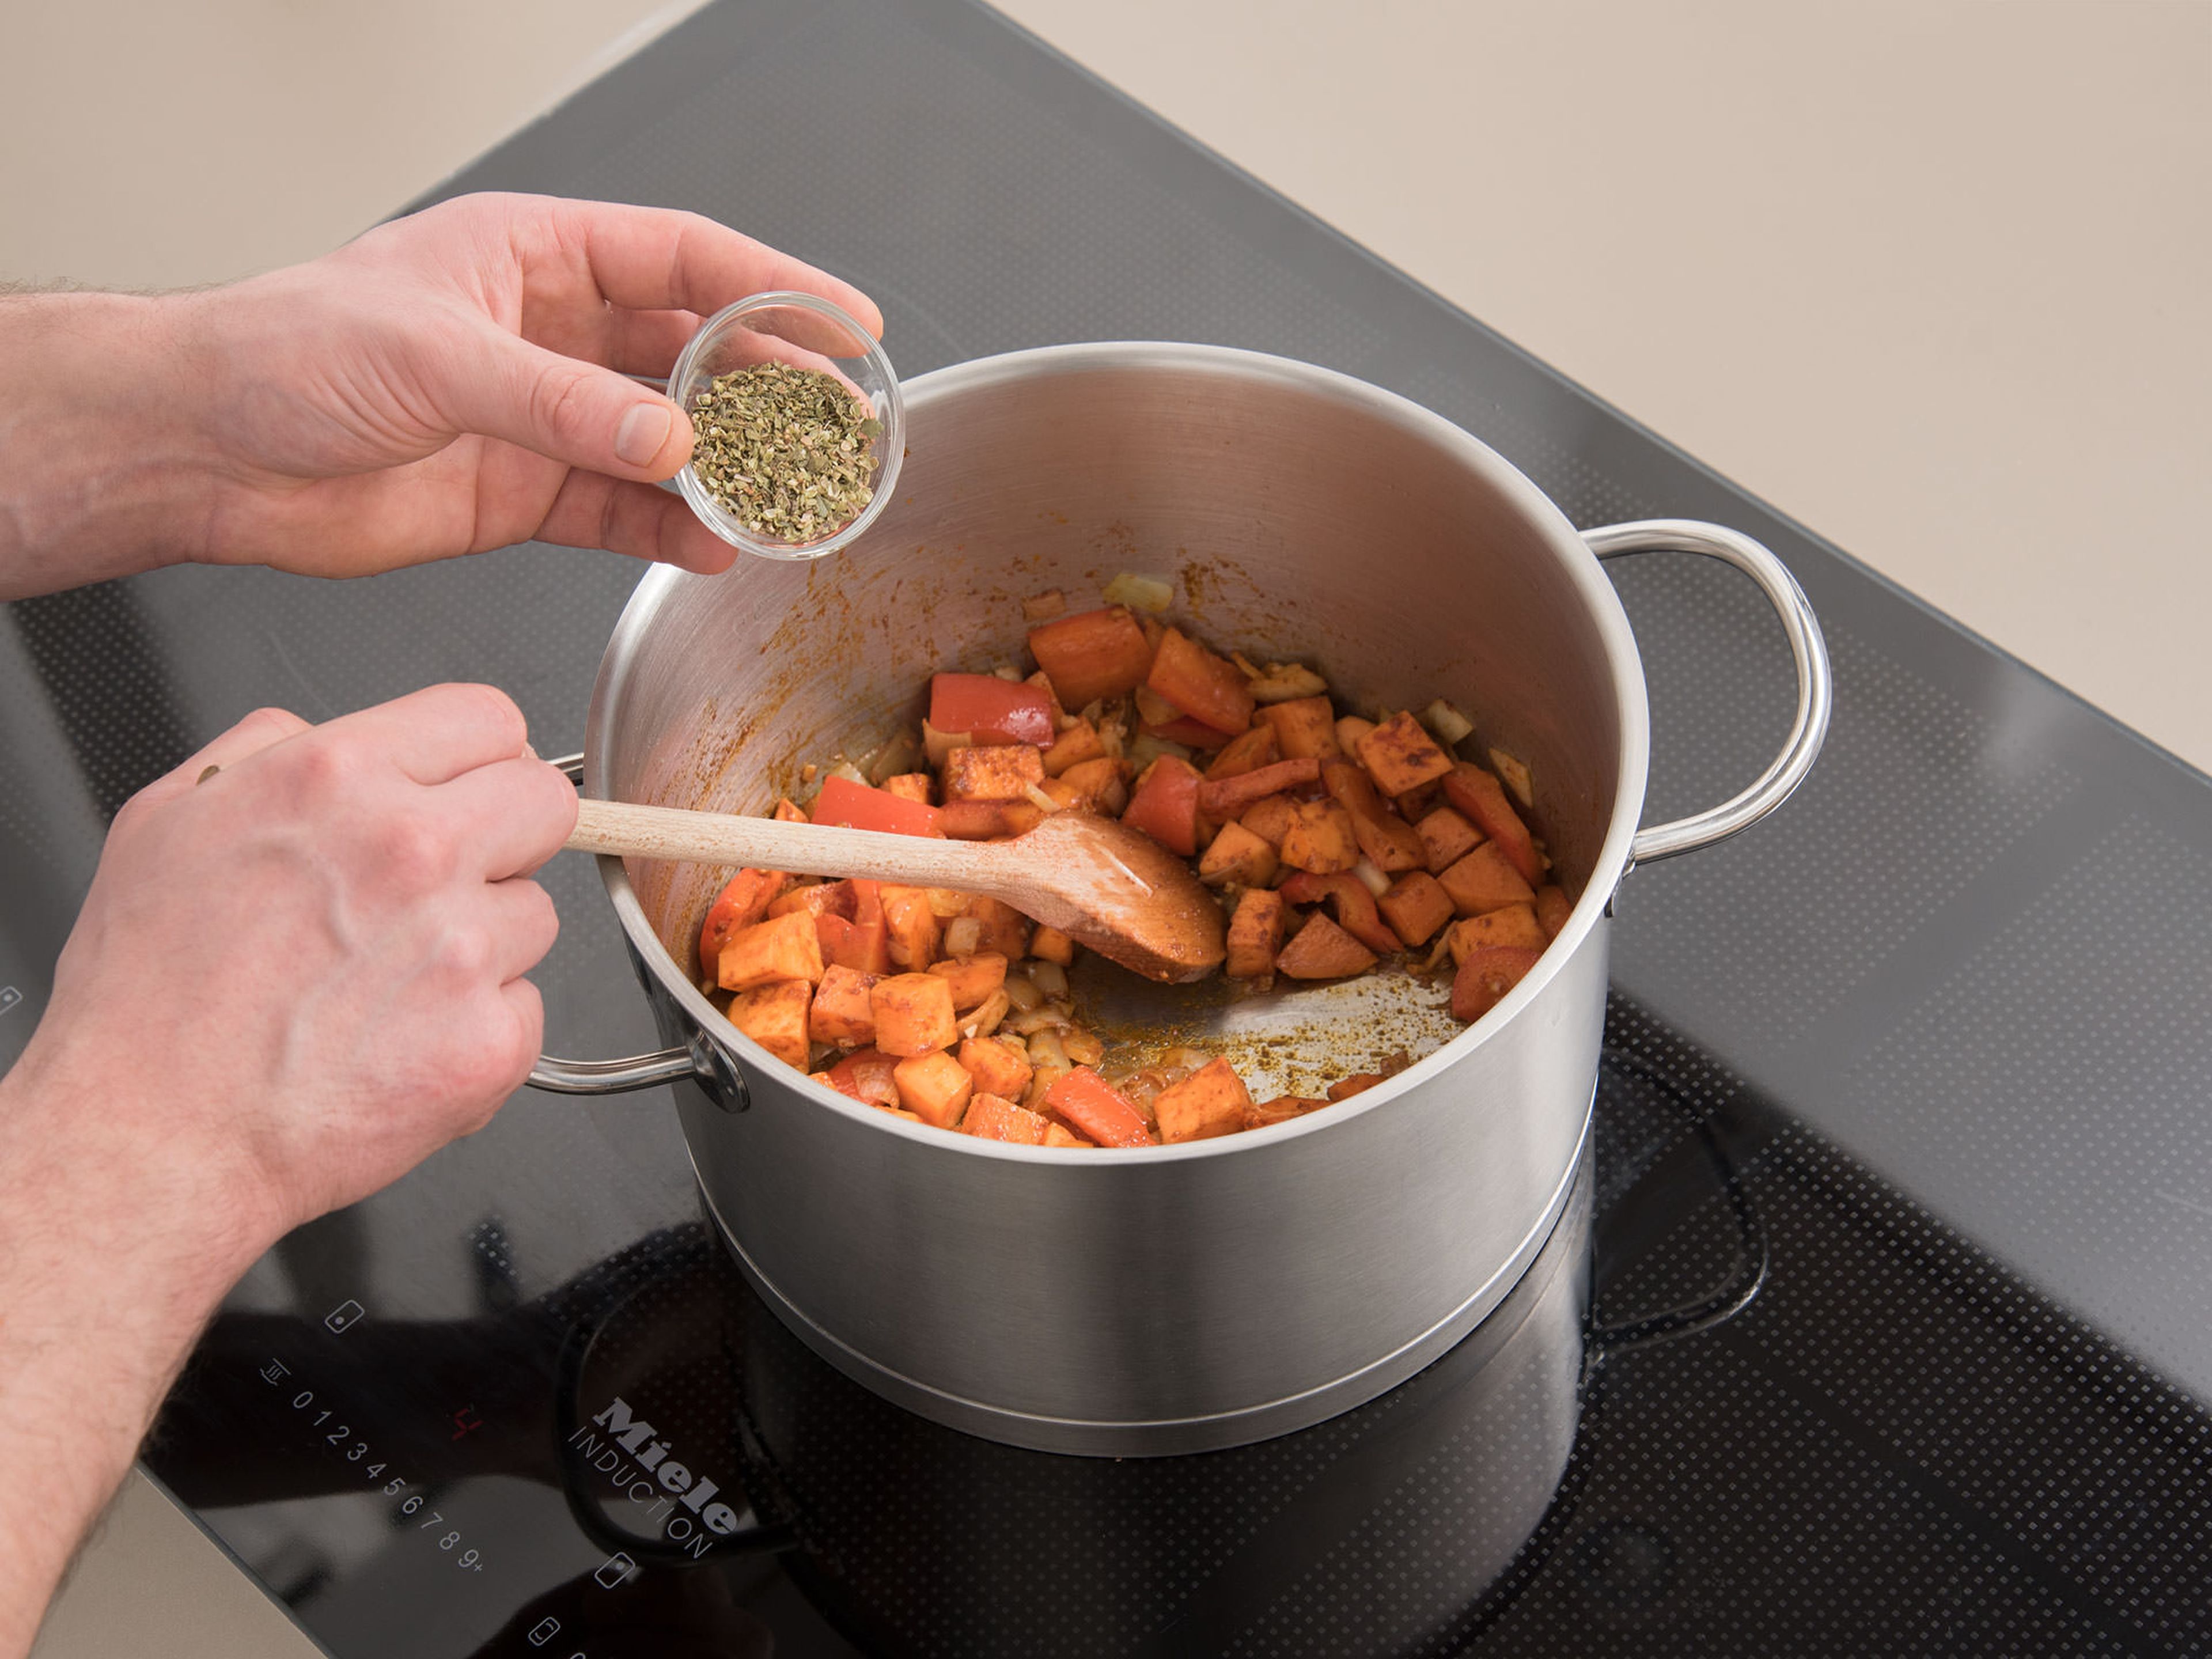 Heat oil in a pot over medium-high heat and fry vegetables for approx. 3 min. Add chili powder, paprika powder, cayenne pepper, cumin, and oregano to the pot and mix well. Sauté for approx. 4 – 5 min.